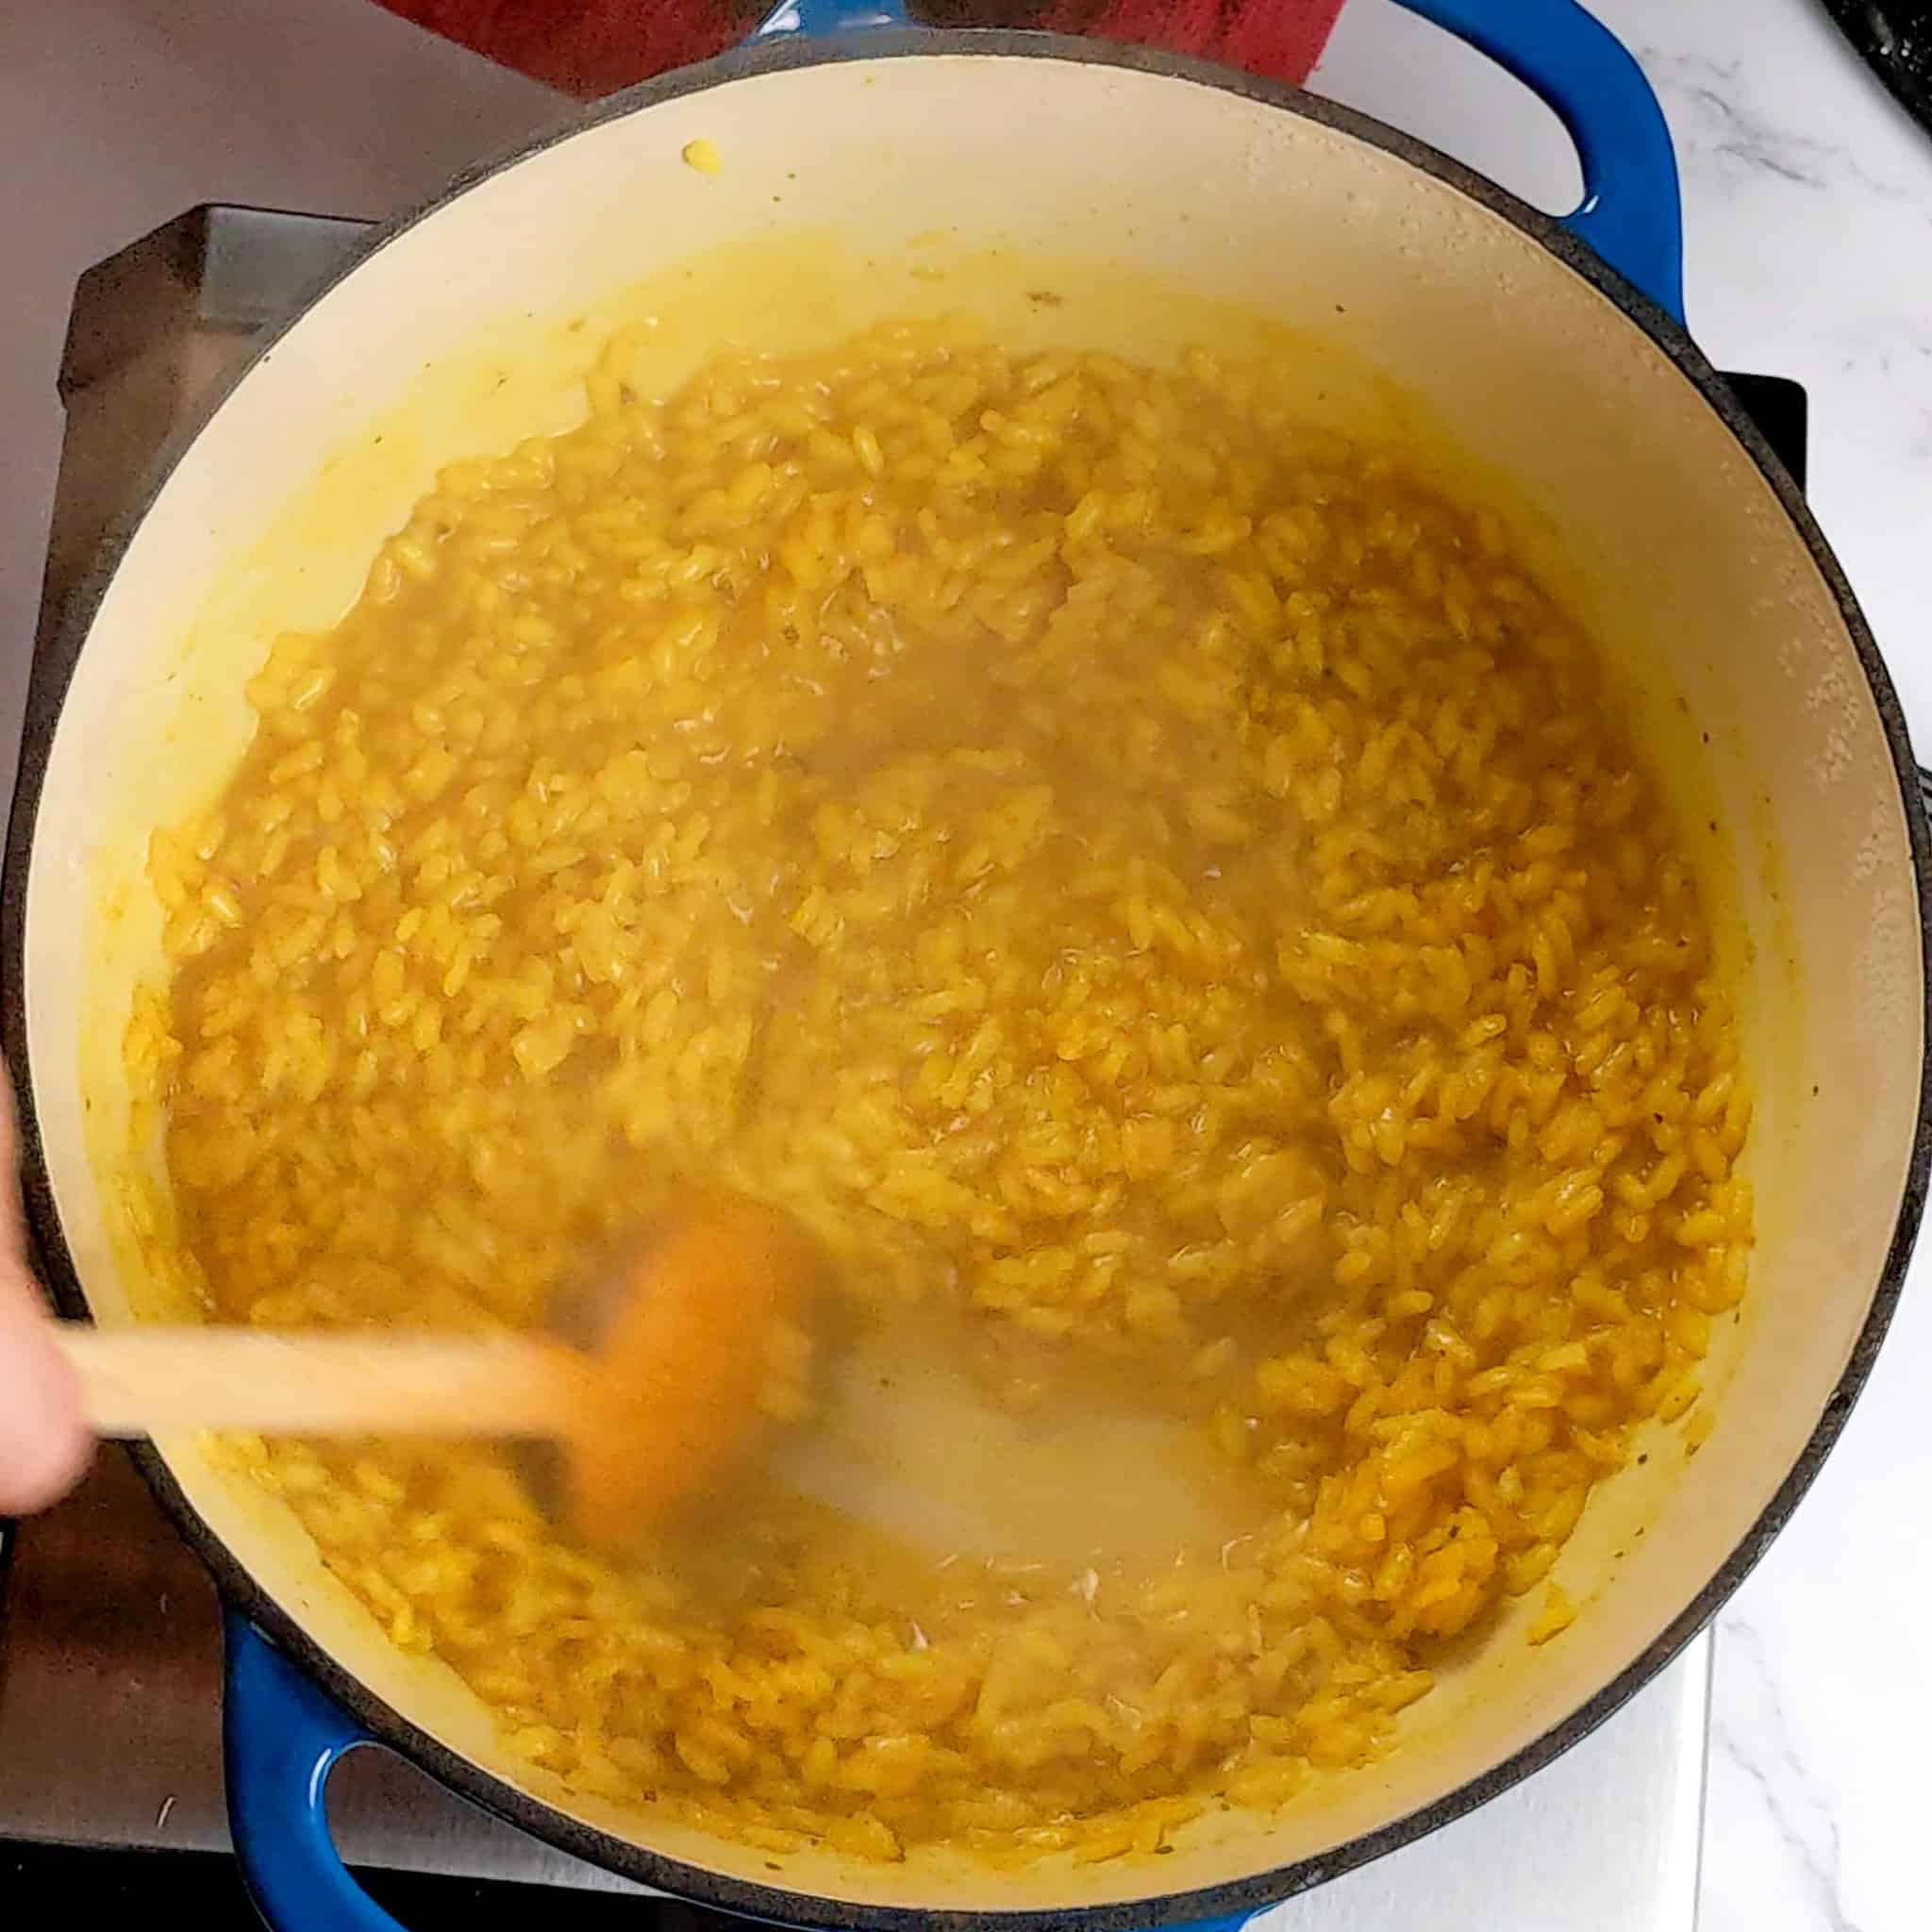 a wooden spoon scrapping the bottom of the pan in one streak to show that the liquid in the risotto is absorbed.